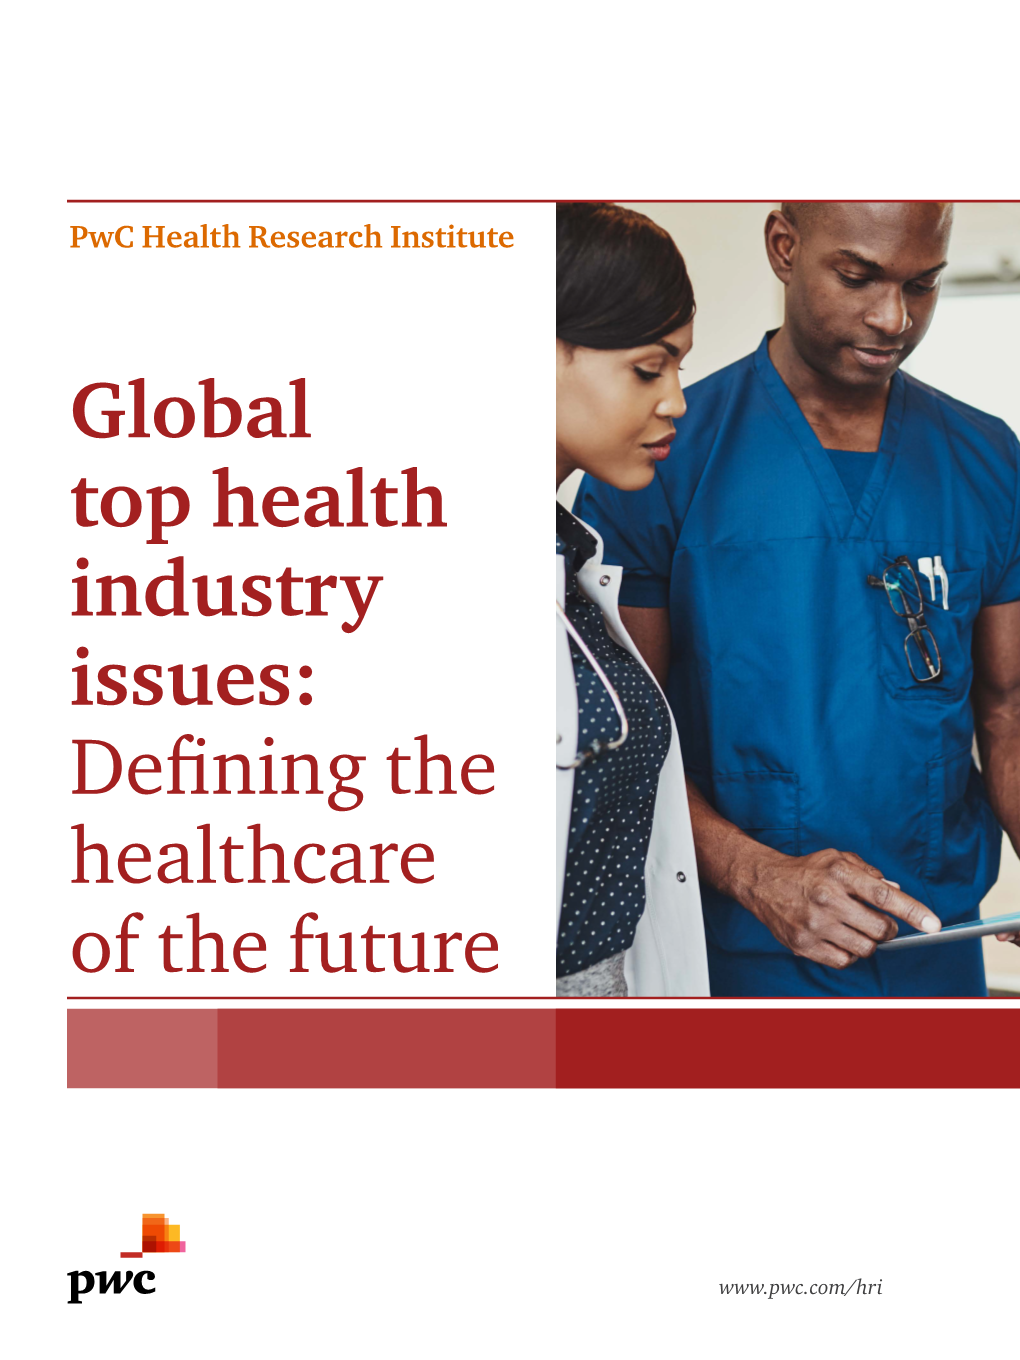 Pwc. Global Top Health Industry Issues. Defining the Healthcare of the Future